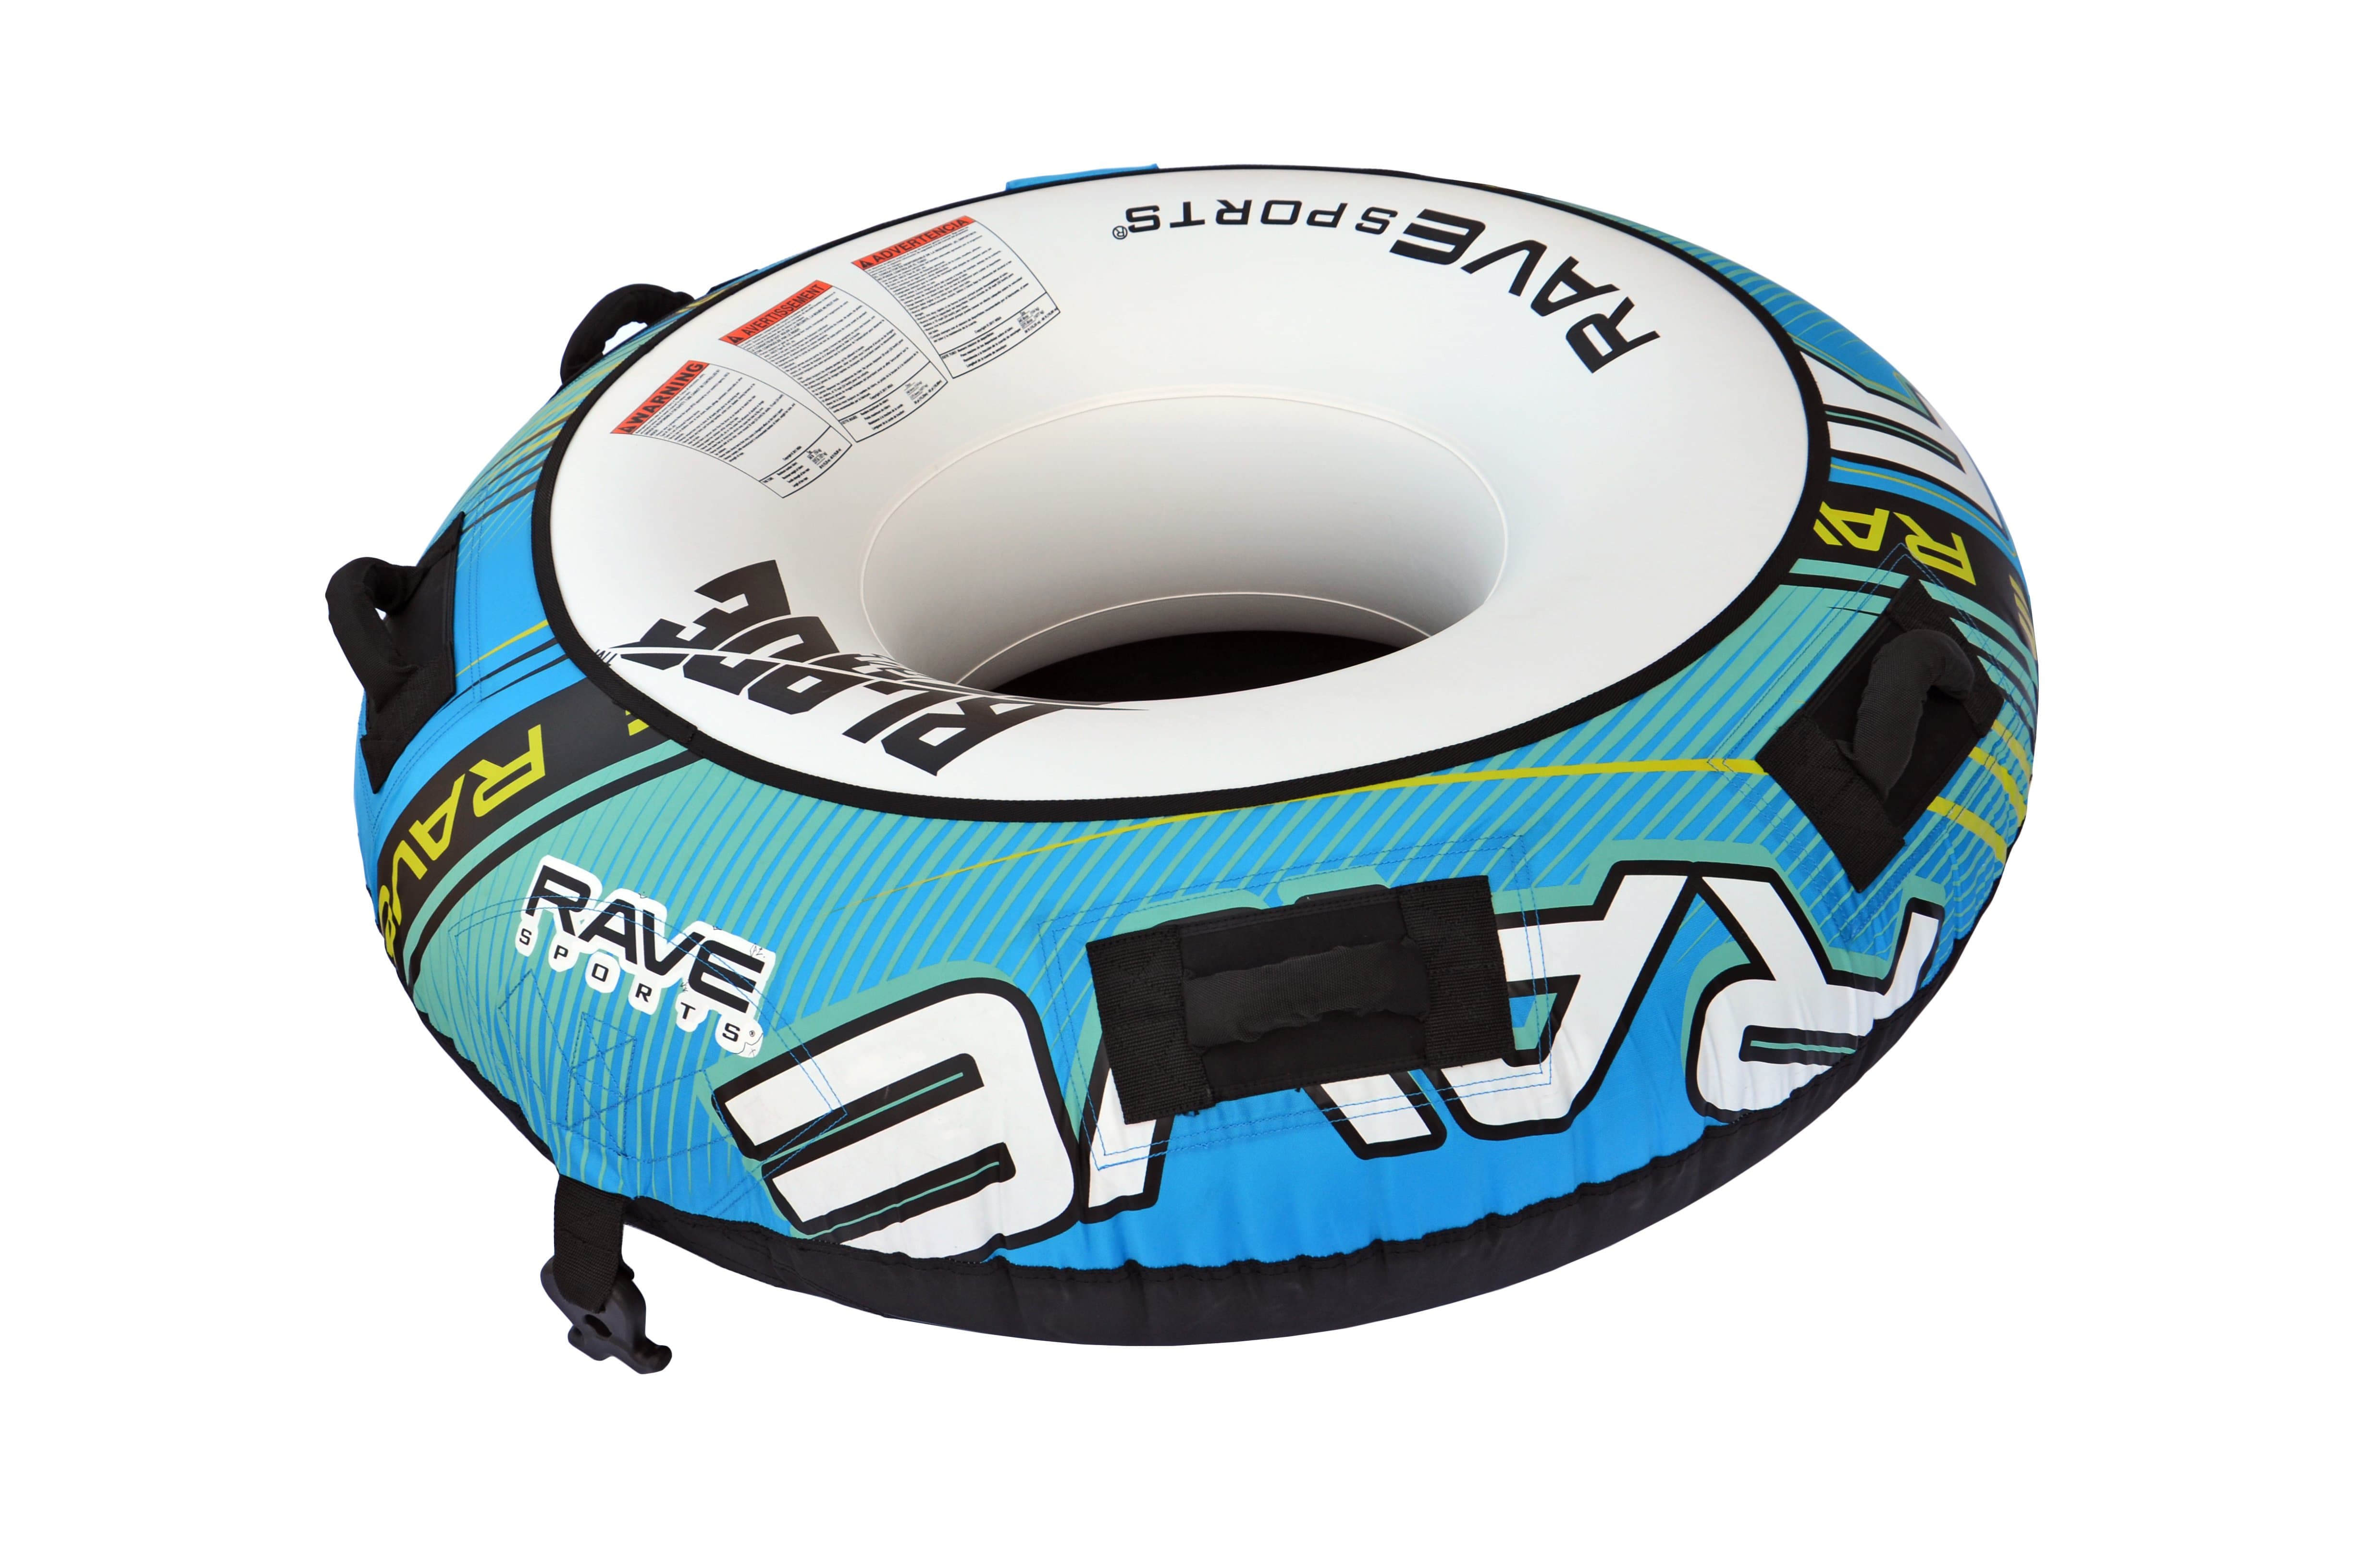 RAVE Towables Open Round Blade 54"